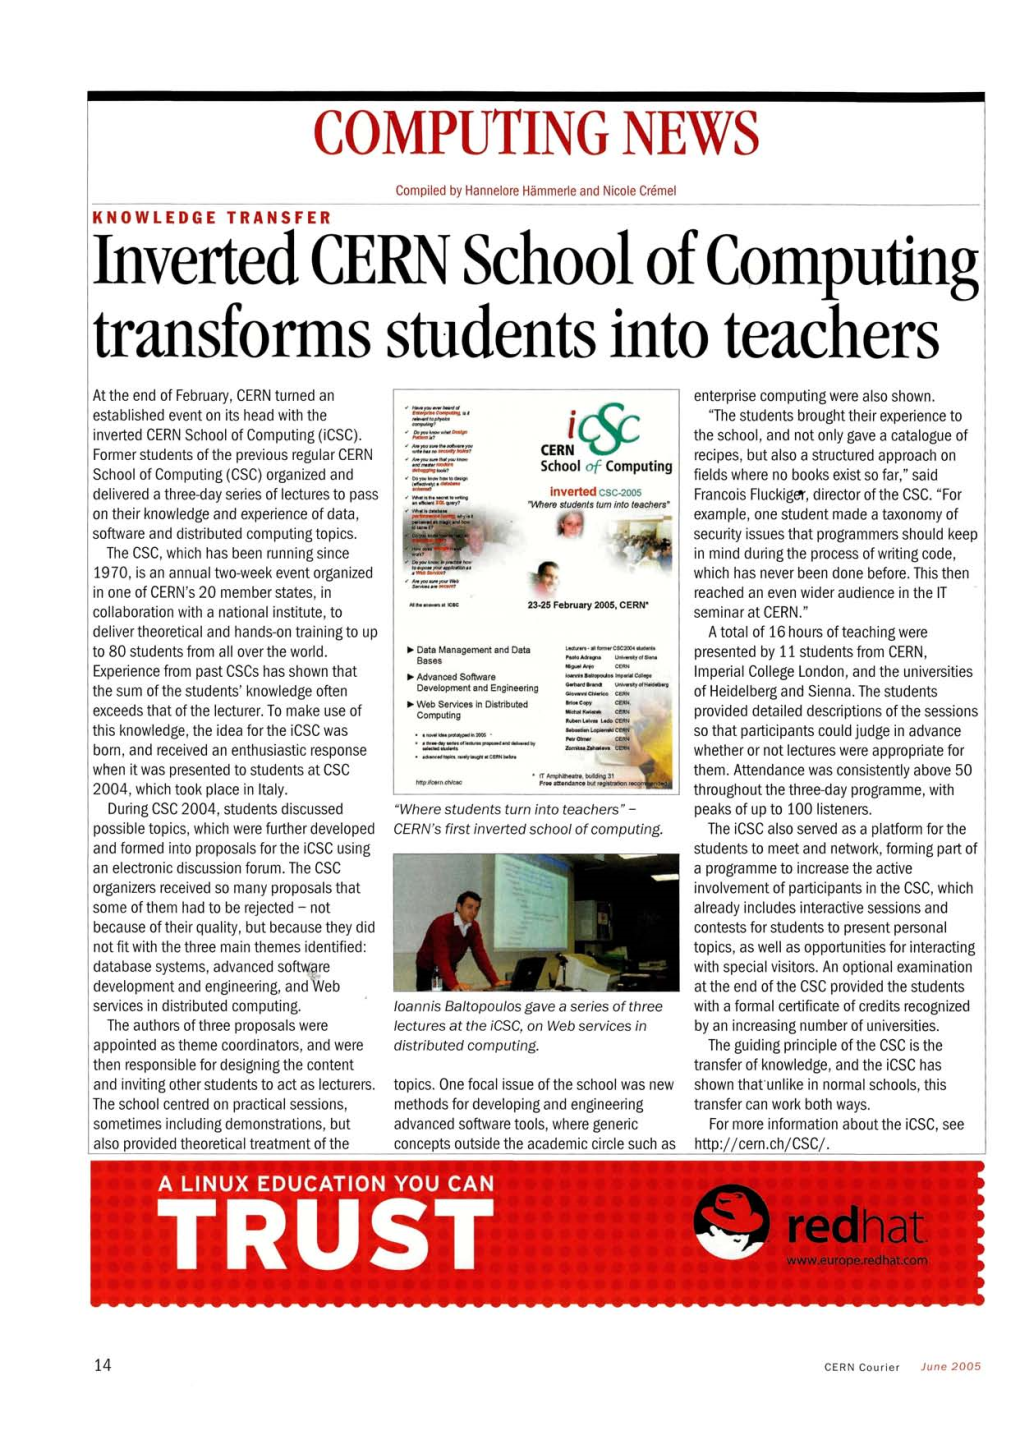 Inverted CERN School of Computing Transforms Students Into Teachers